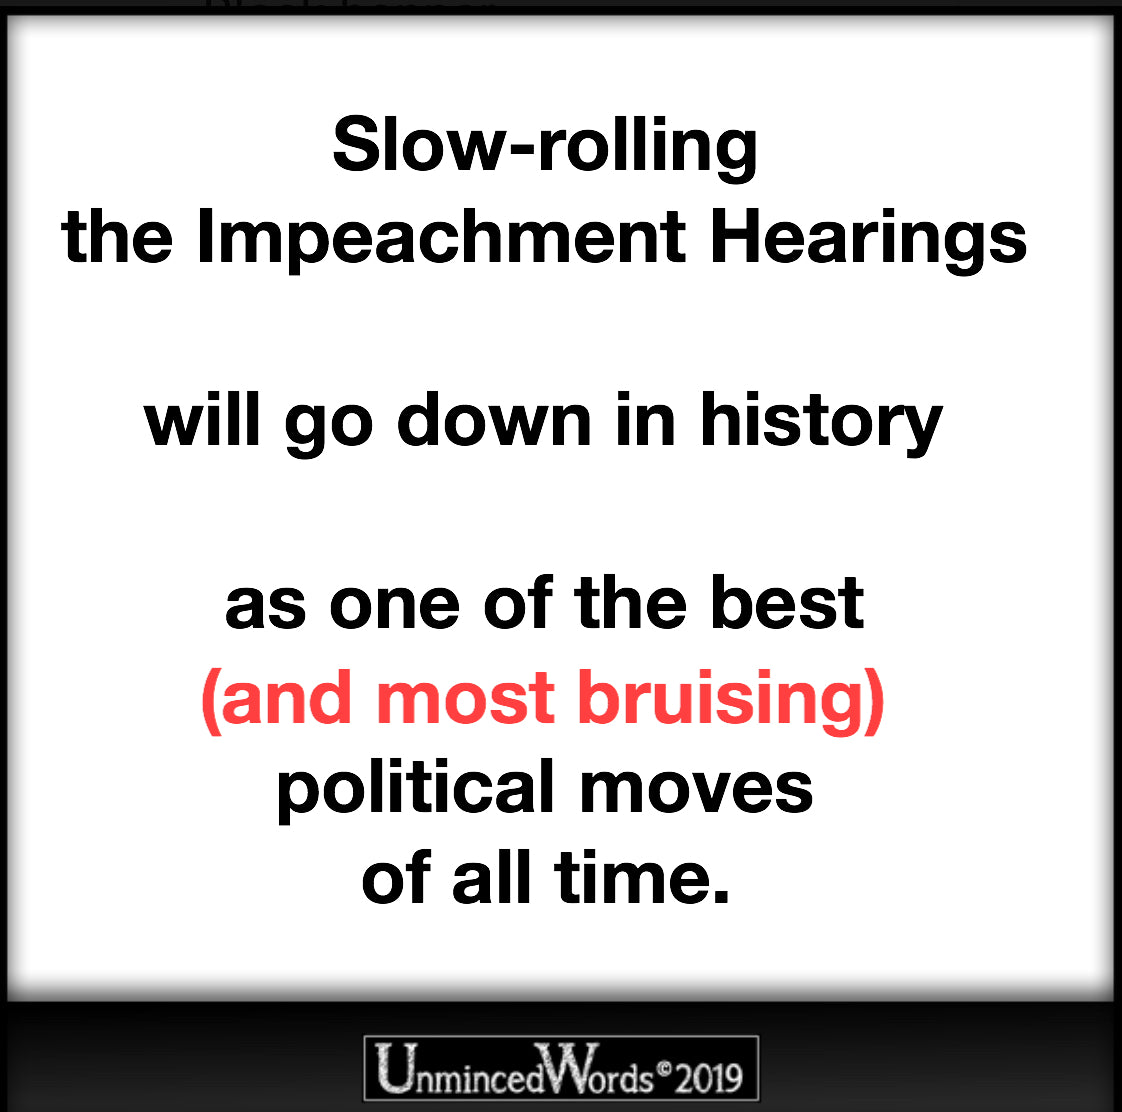 Slow-rolling the Impeachment Hearings